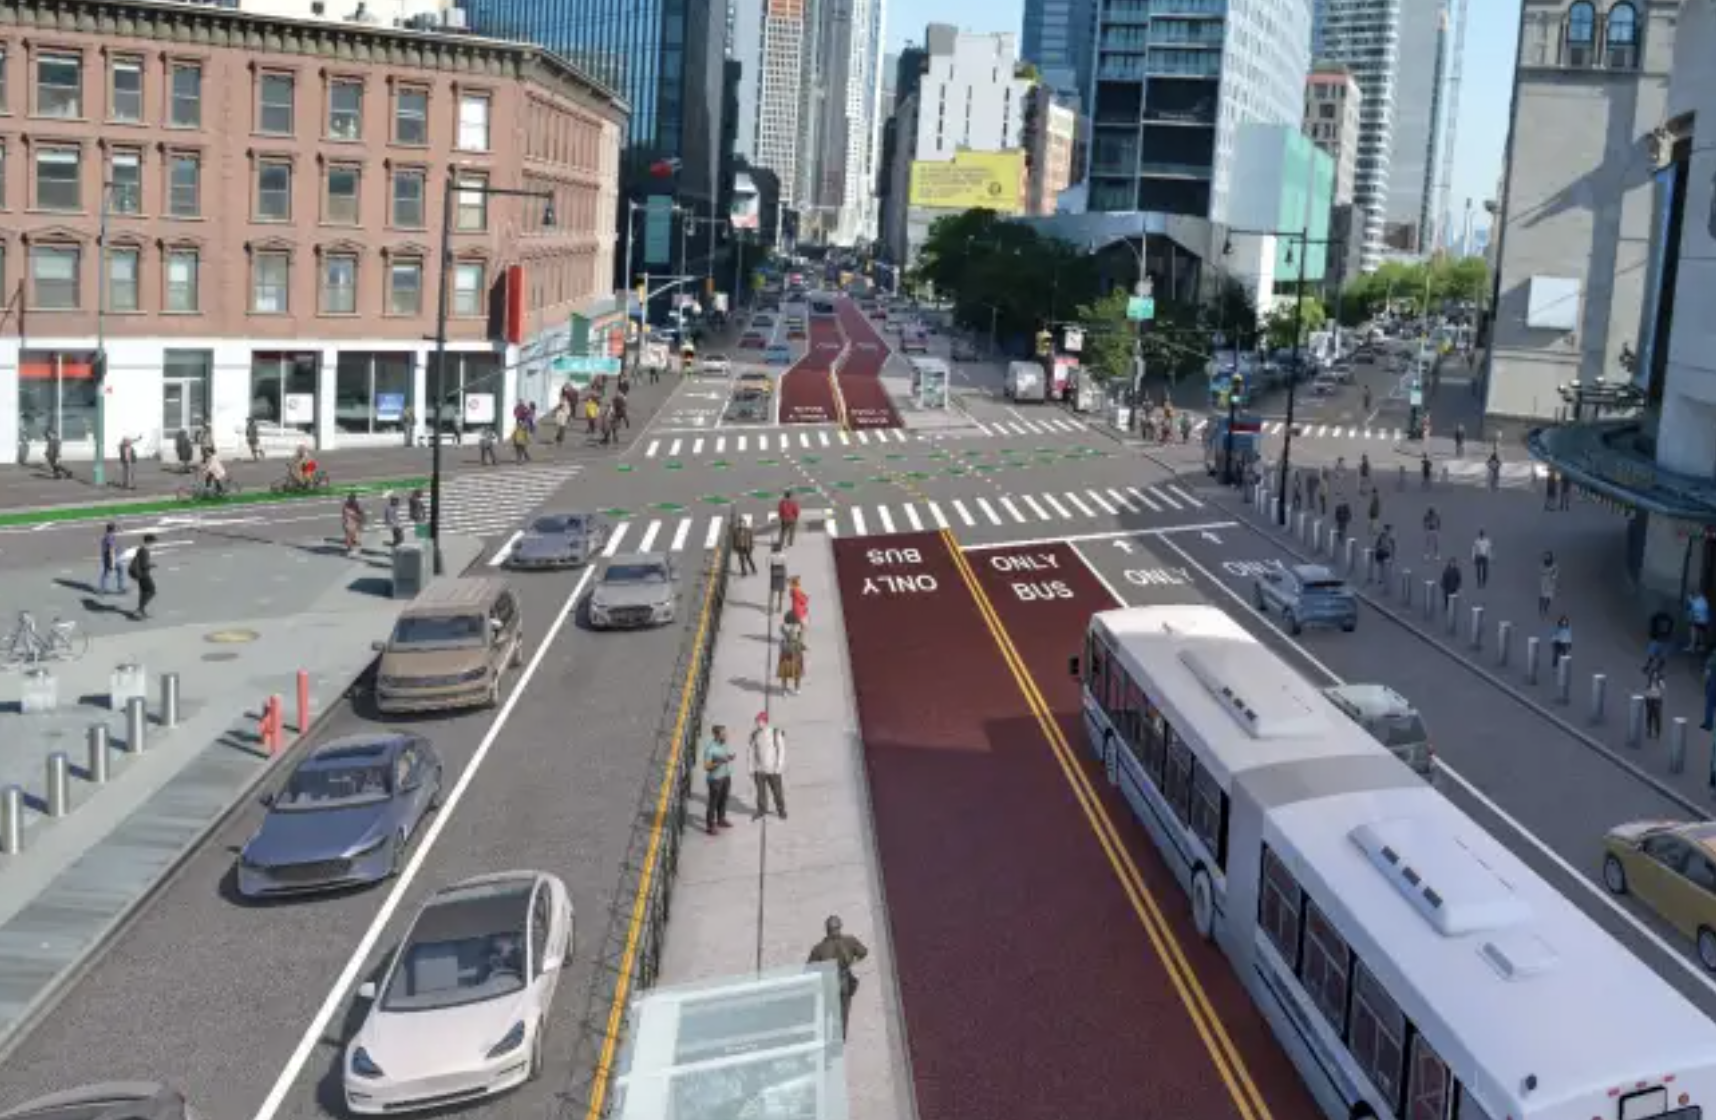 Here is what Flatbush Avenue might look like once a bus lane is added